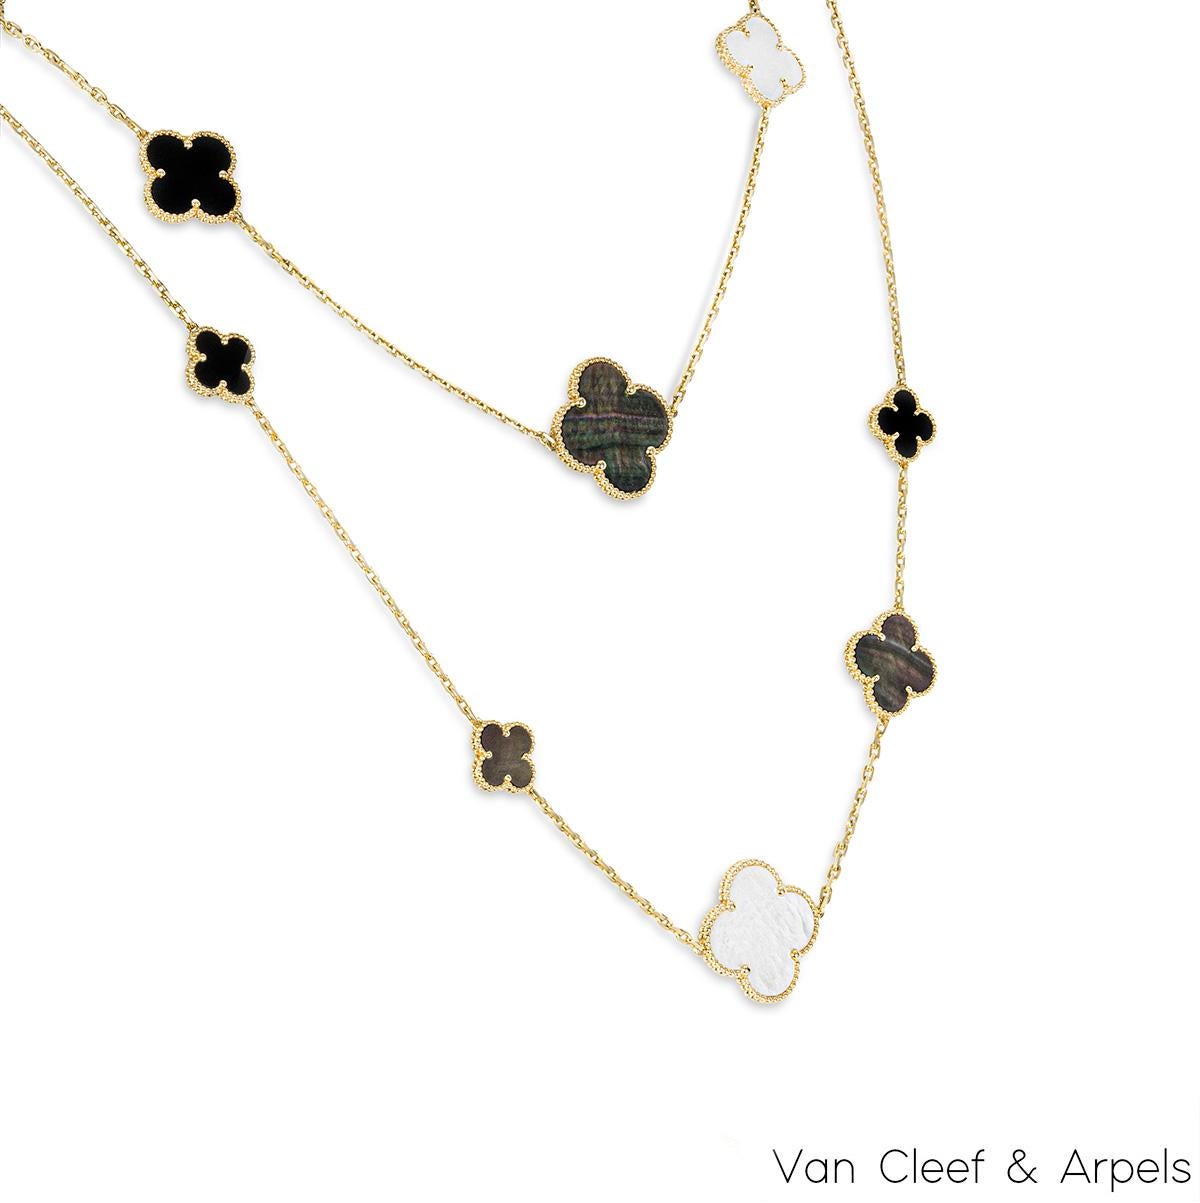 A gorgeous 18k yellow gold Van Cleef & Arpels necklace from the Magic Alhambra collection. The necklace comprises of 16 iconic 4 leaf clover motifs alternating in size, set with white mother of pearl, grey mother of pearl and onyx inlays and